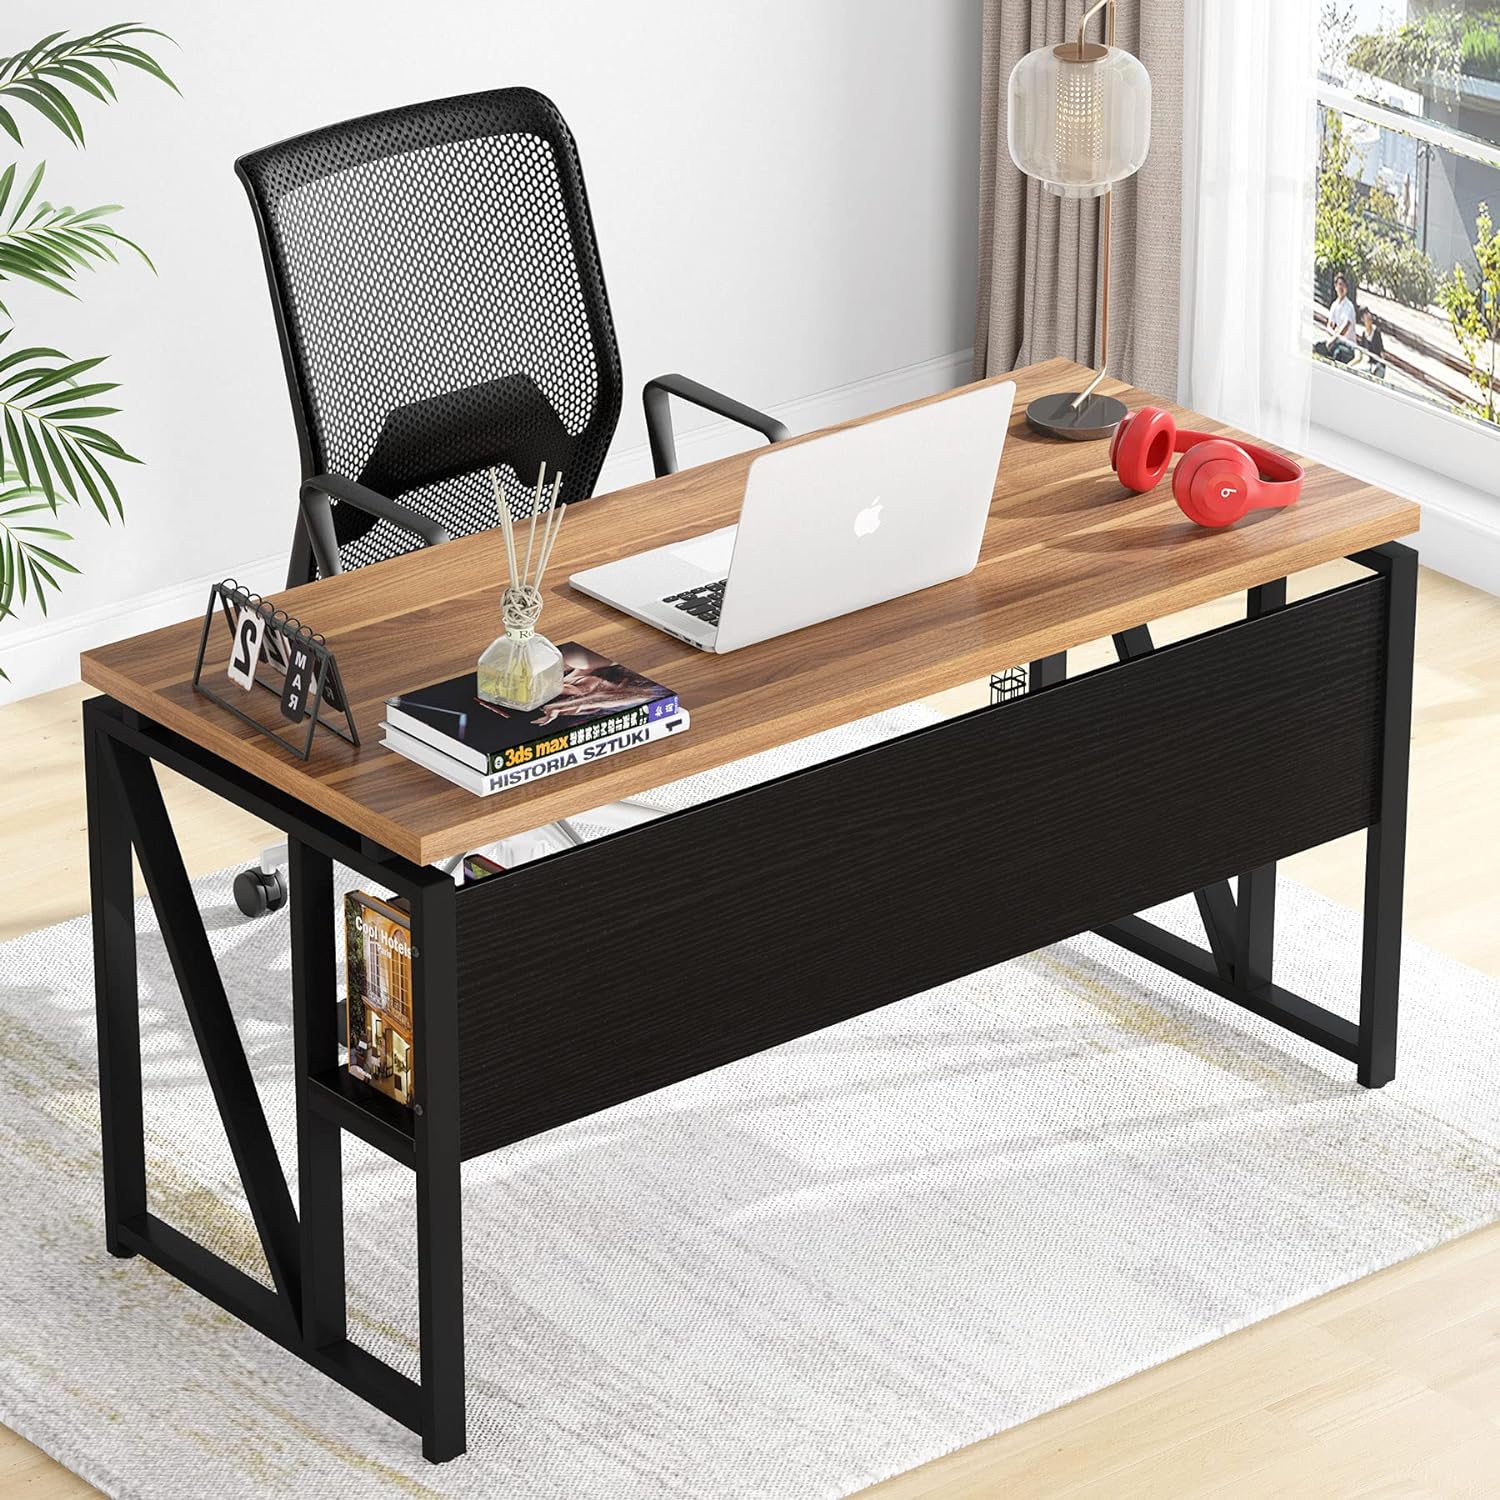 Tribesigns 55 inches Computer Desk with Bottom Stoage ShelfHome Office Desk Writing Table for Workstation, Cabinet not Included